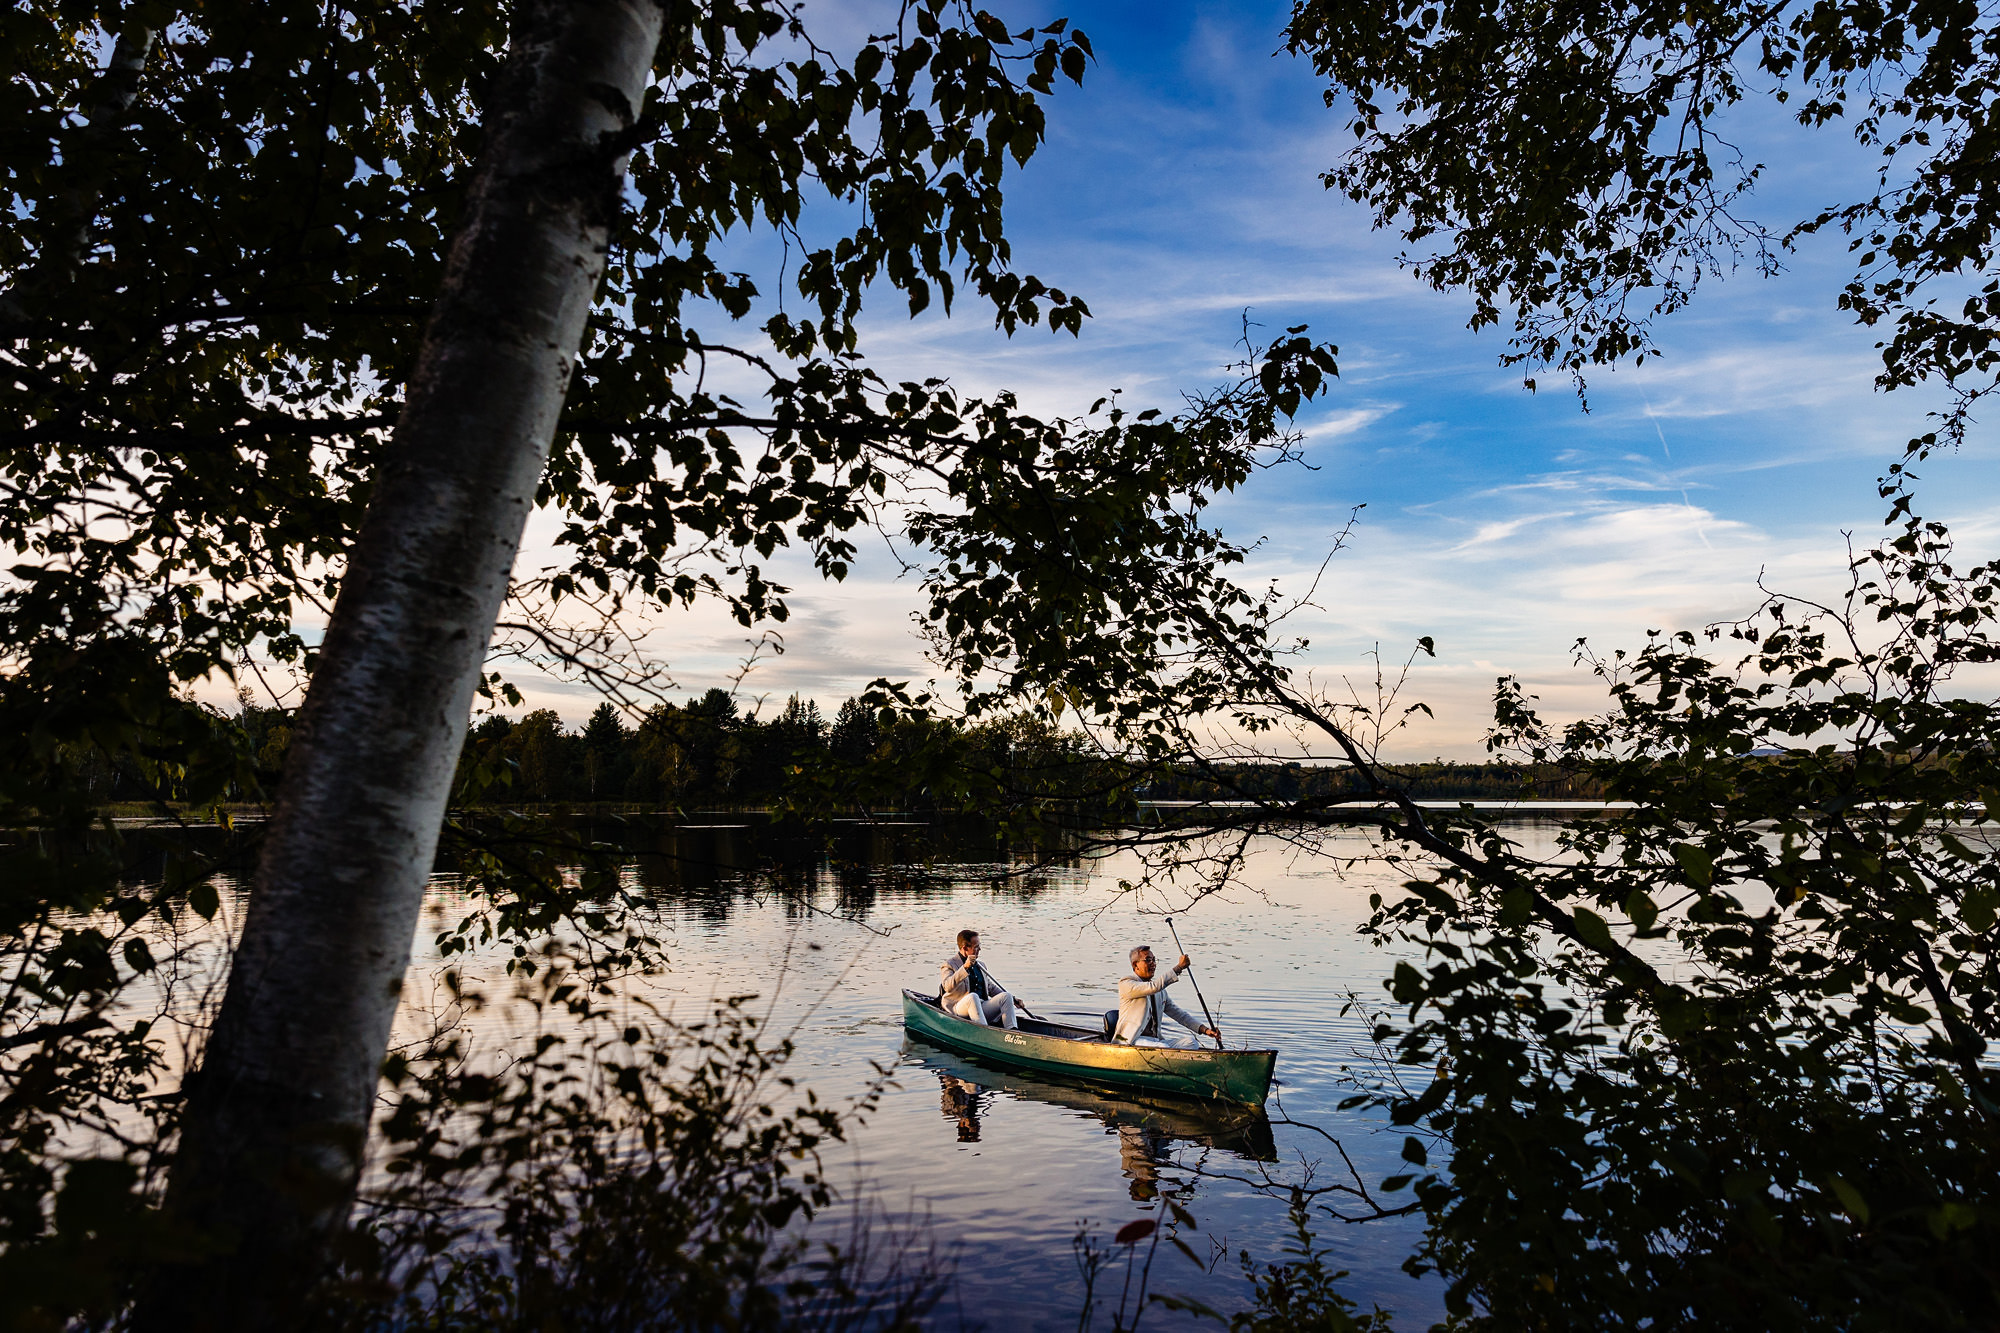 A wedding portrait of two grooms canoeing at sunset.